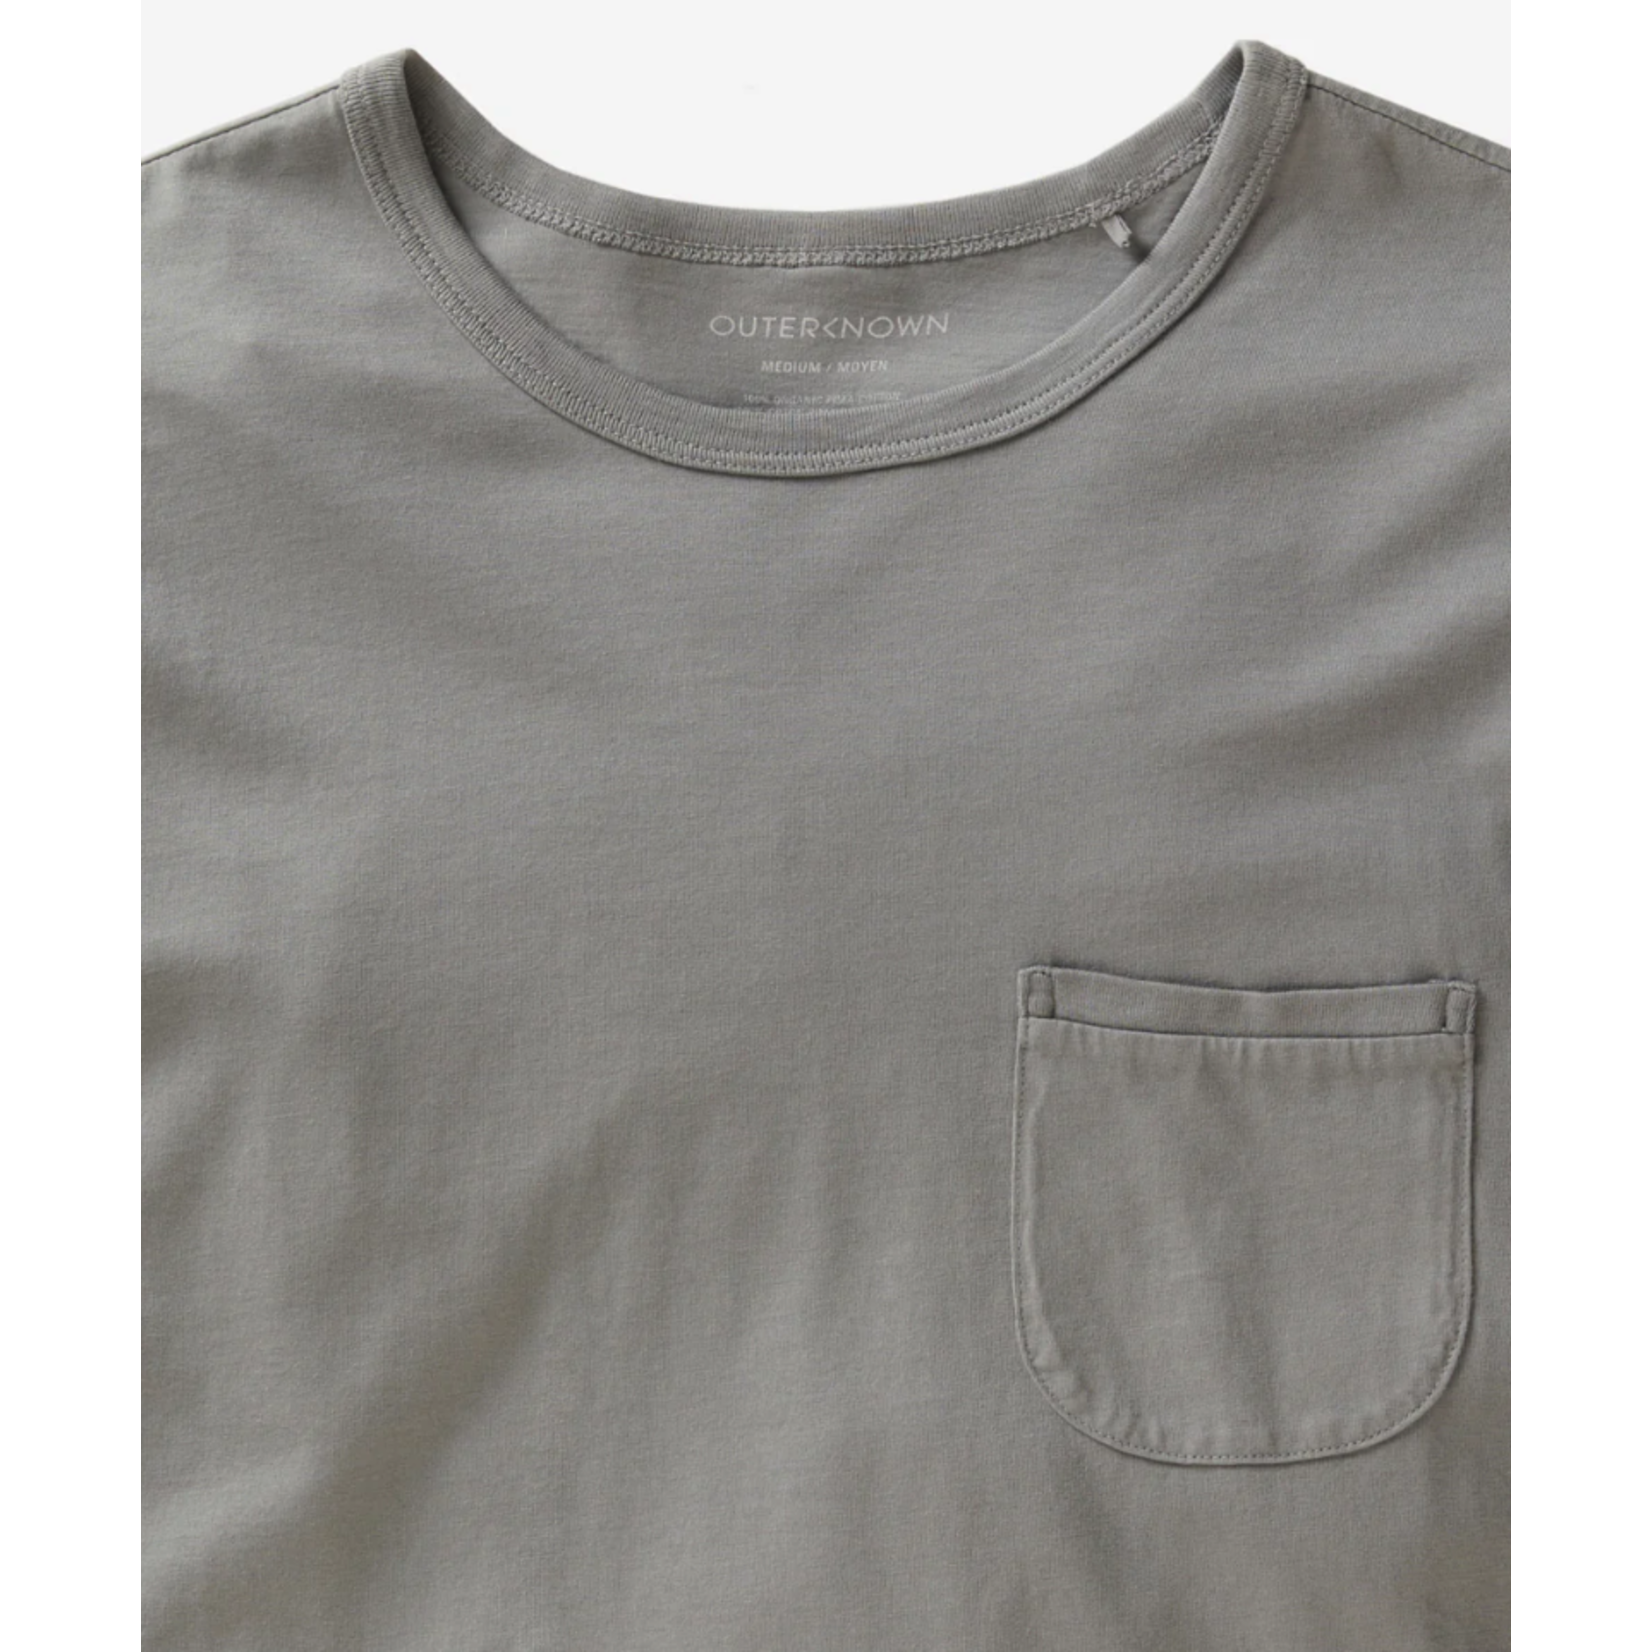 Outerknown Sojourn L/S Pocket Tee